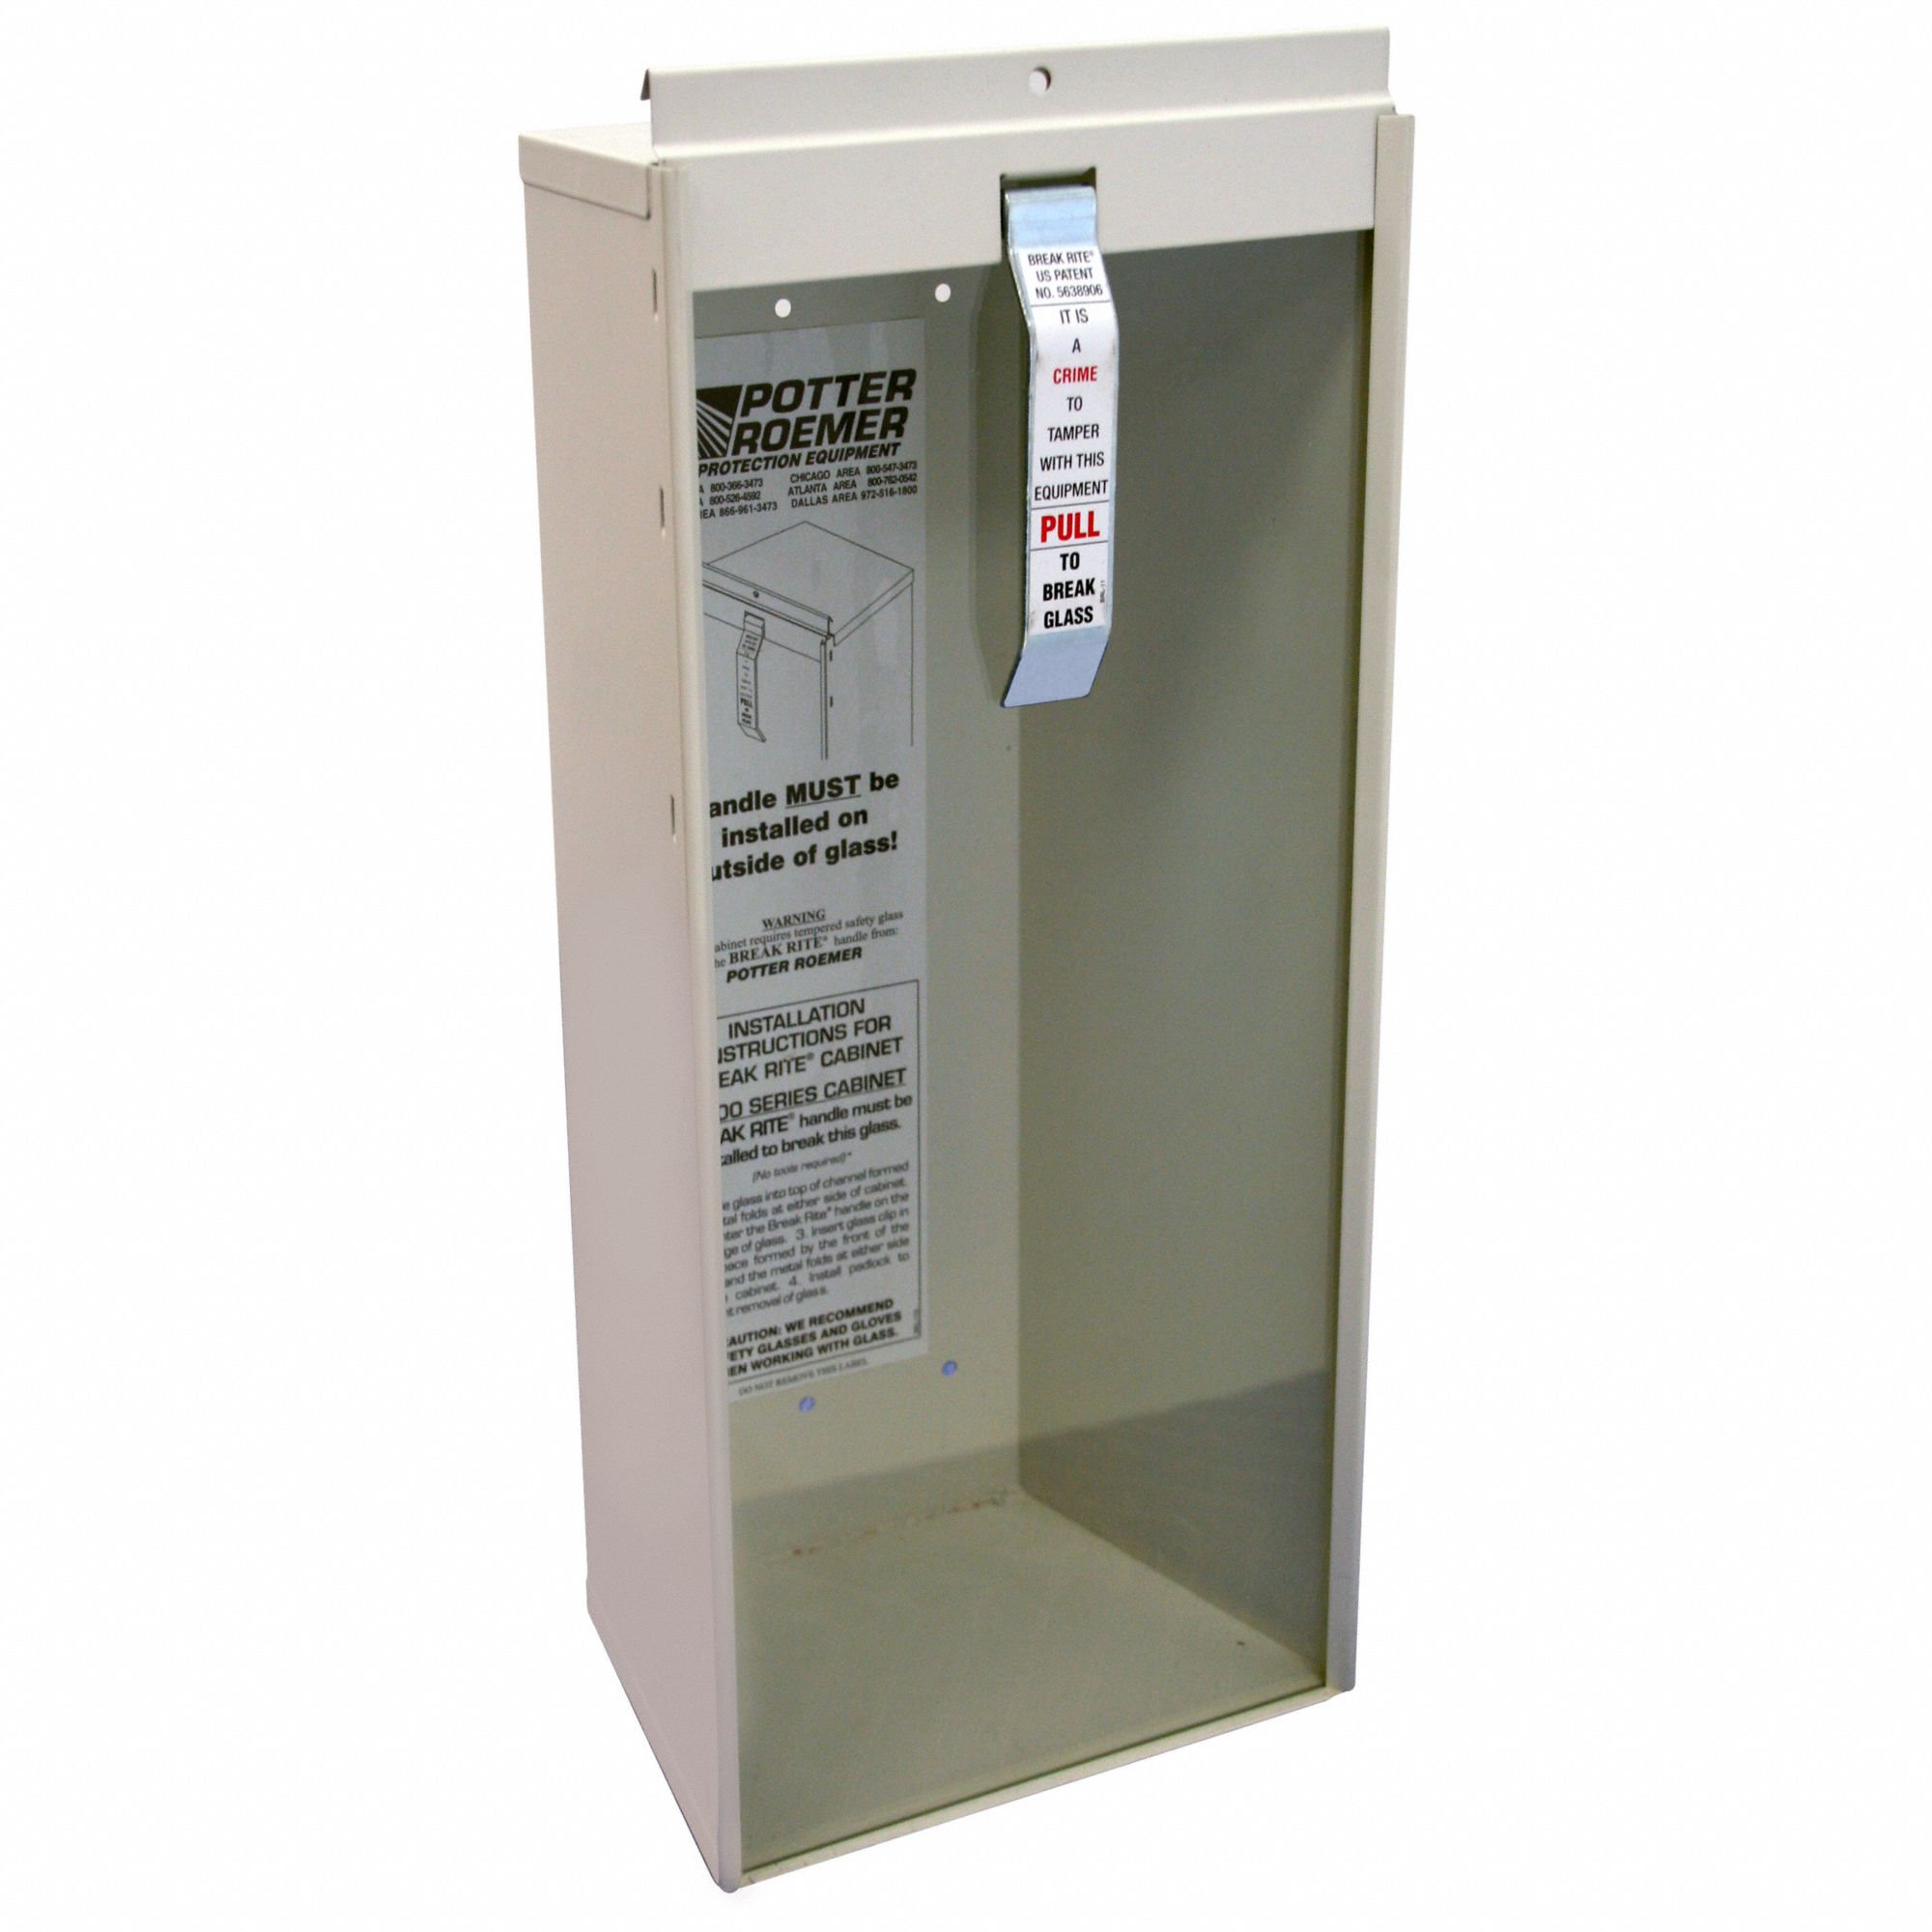 Fire Extinguisher Cabinet: Surface Mount Mounting, 6 lb Capacity, Galvanized Steel, 19 in Ht